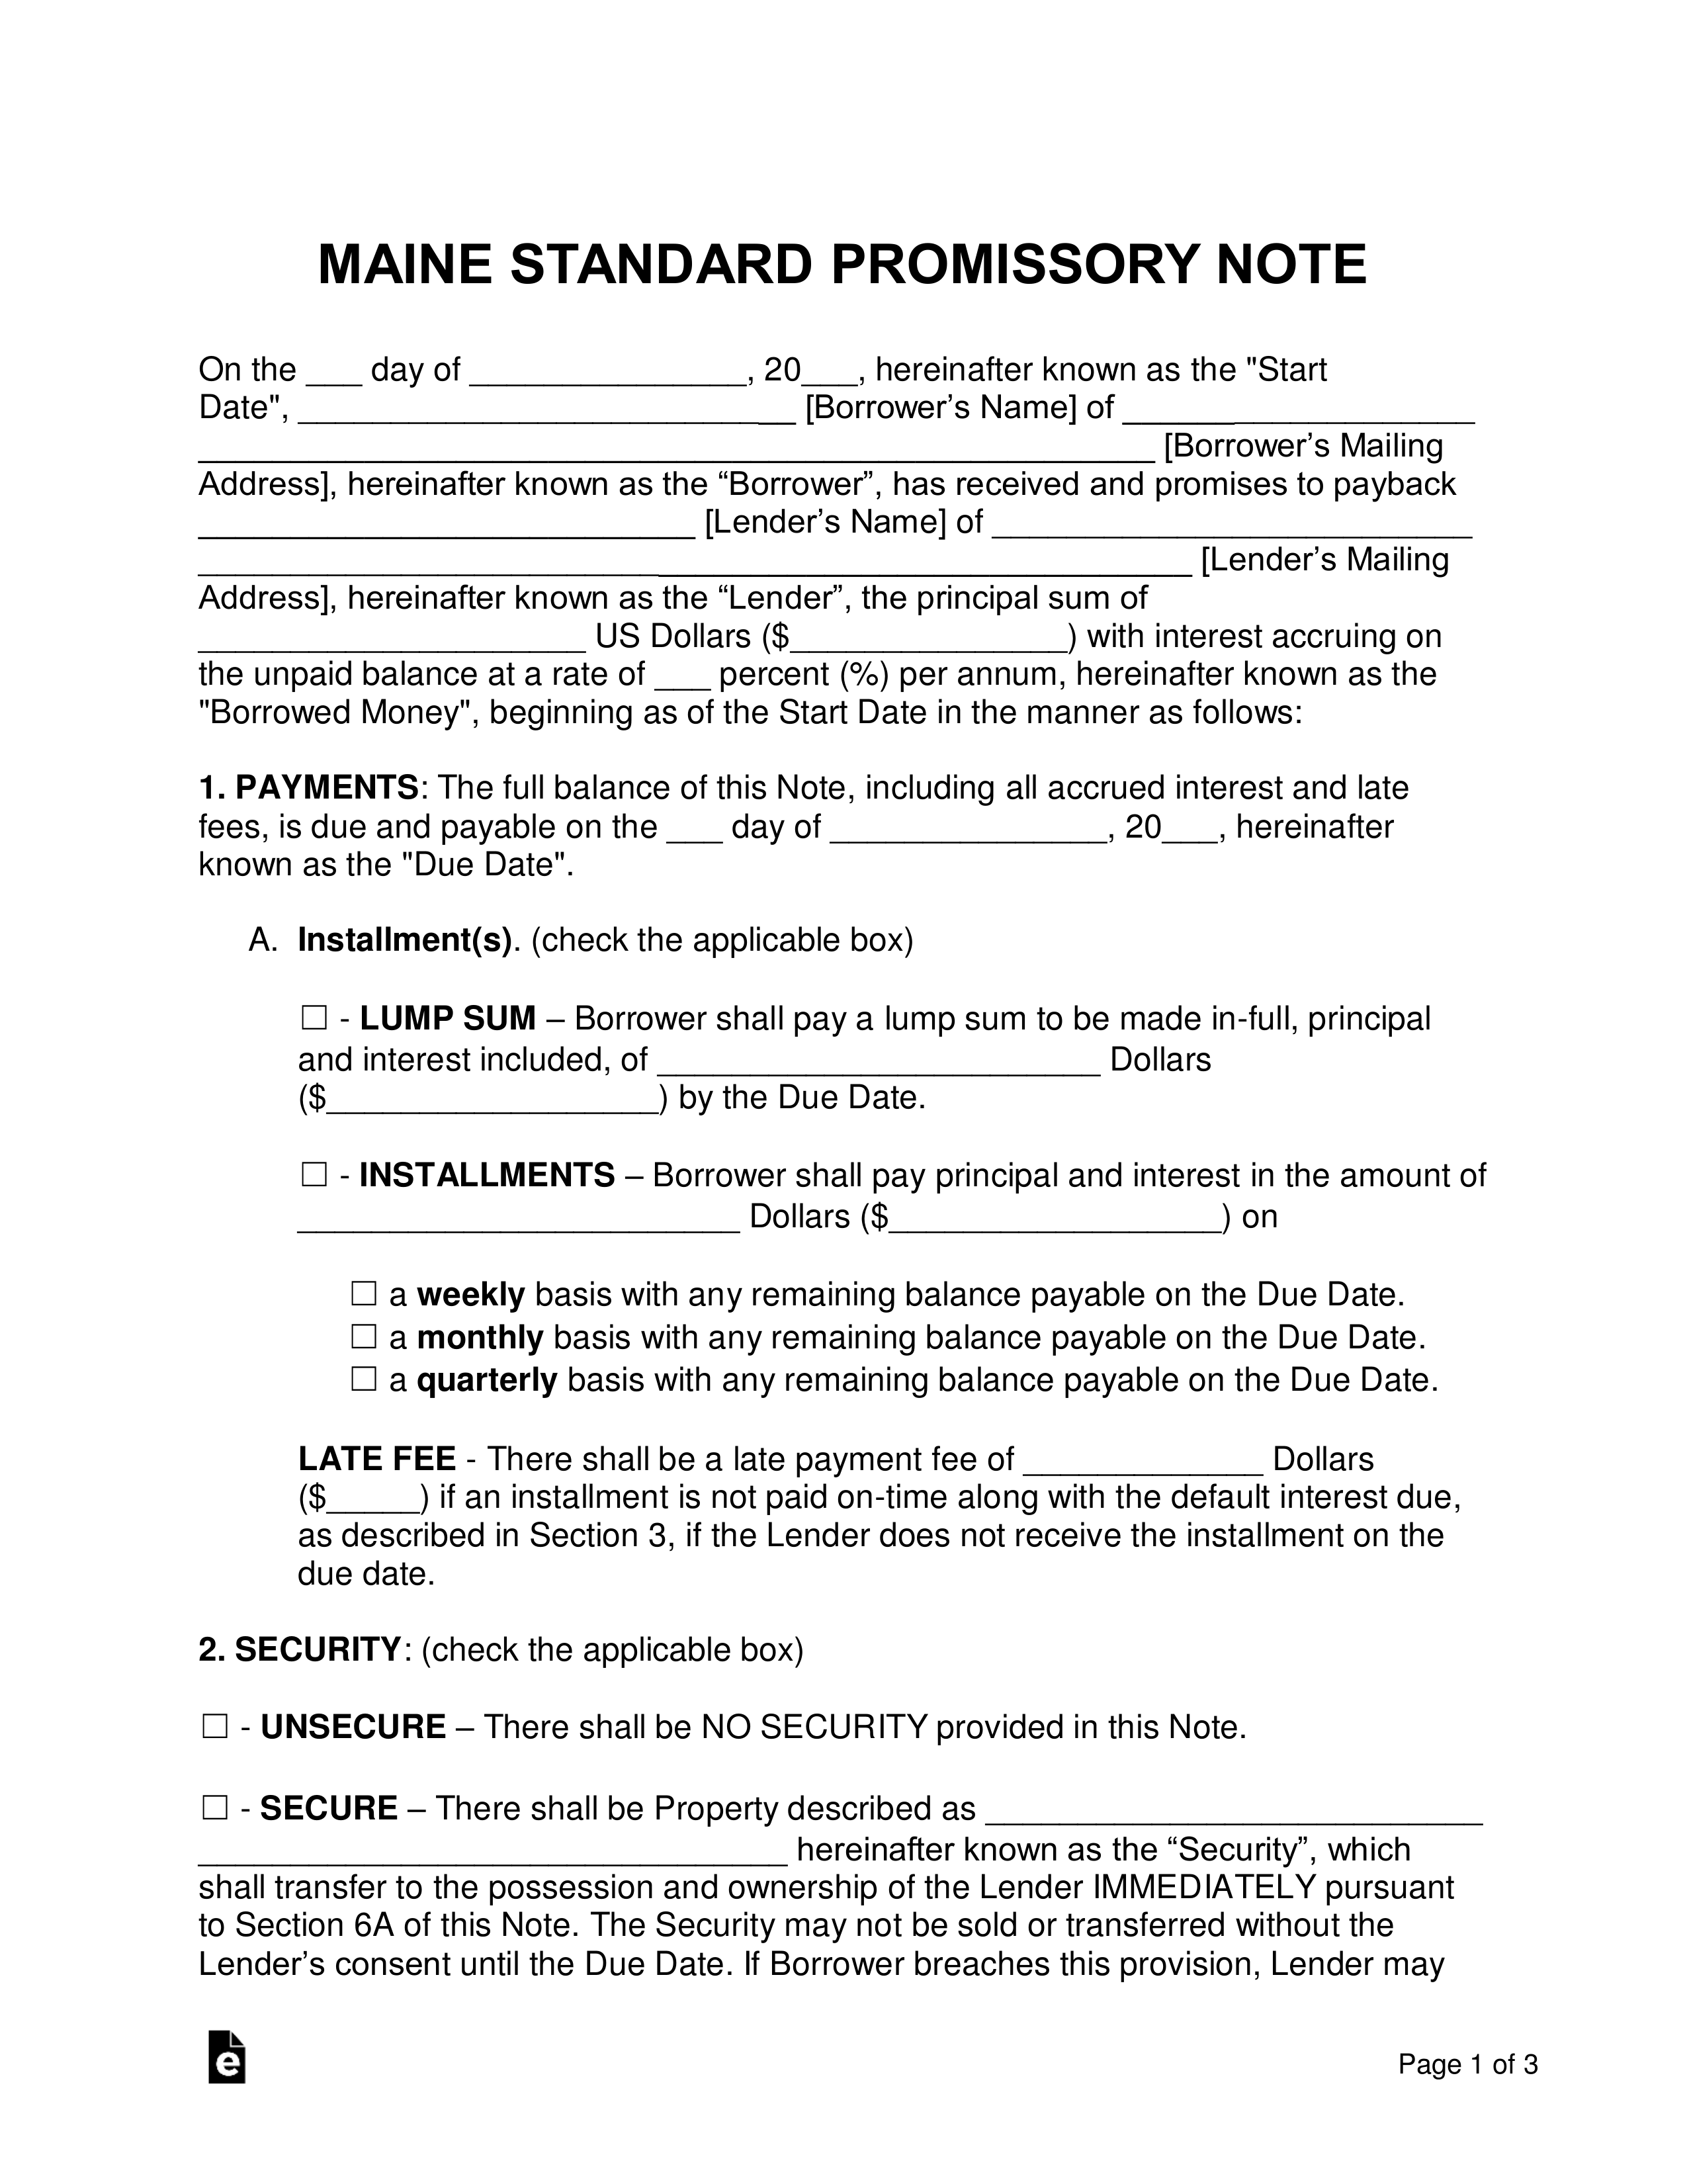 Maine Promissory Note Templates (2)